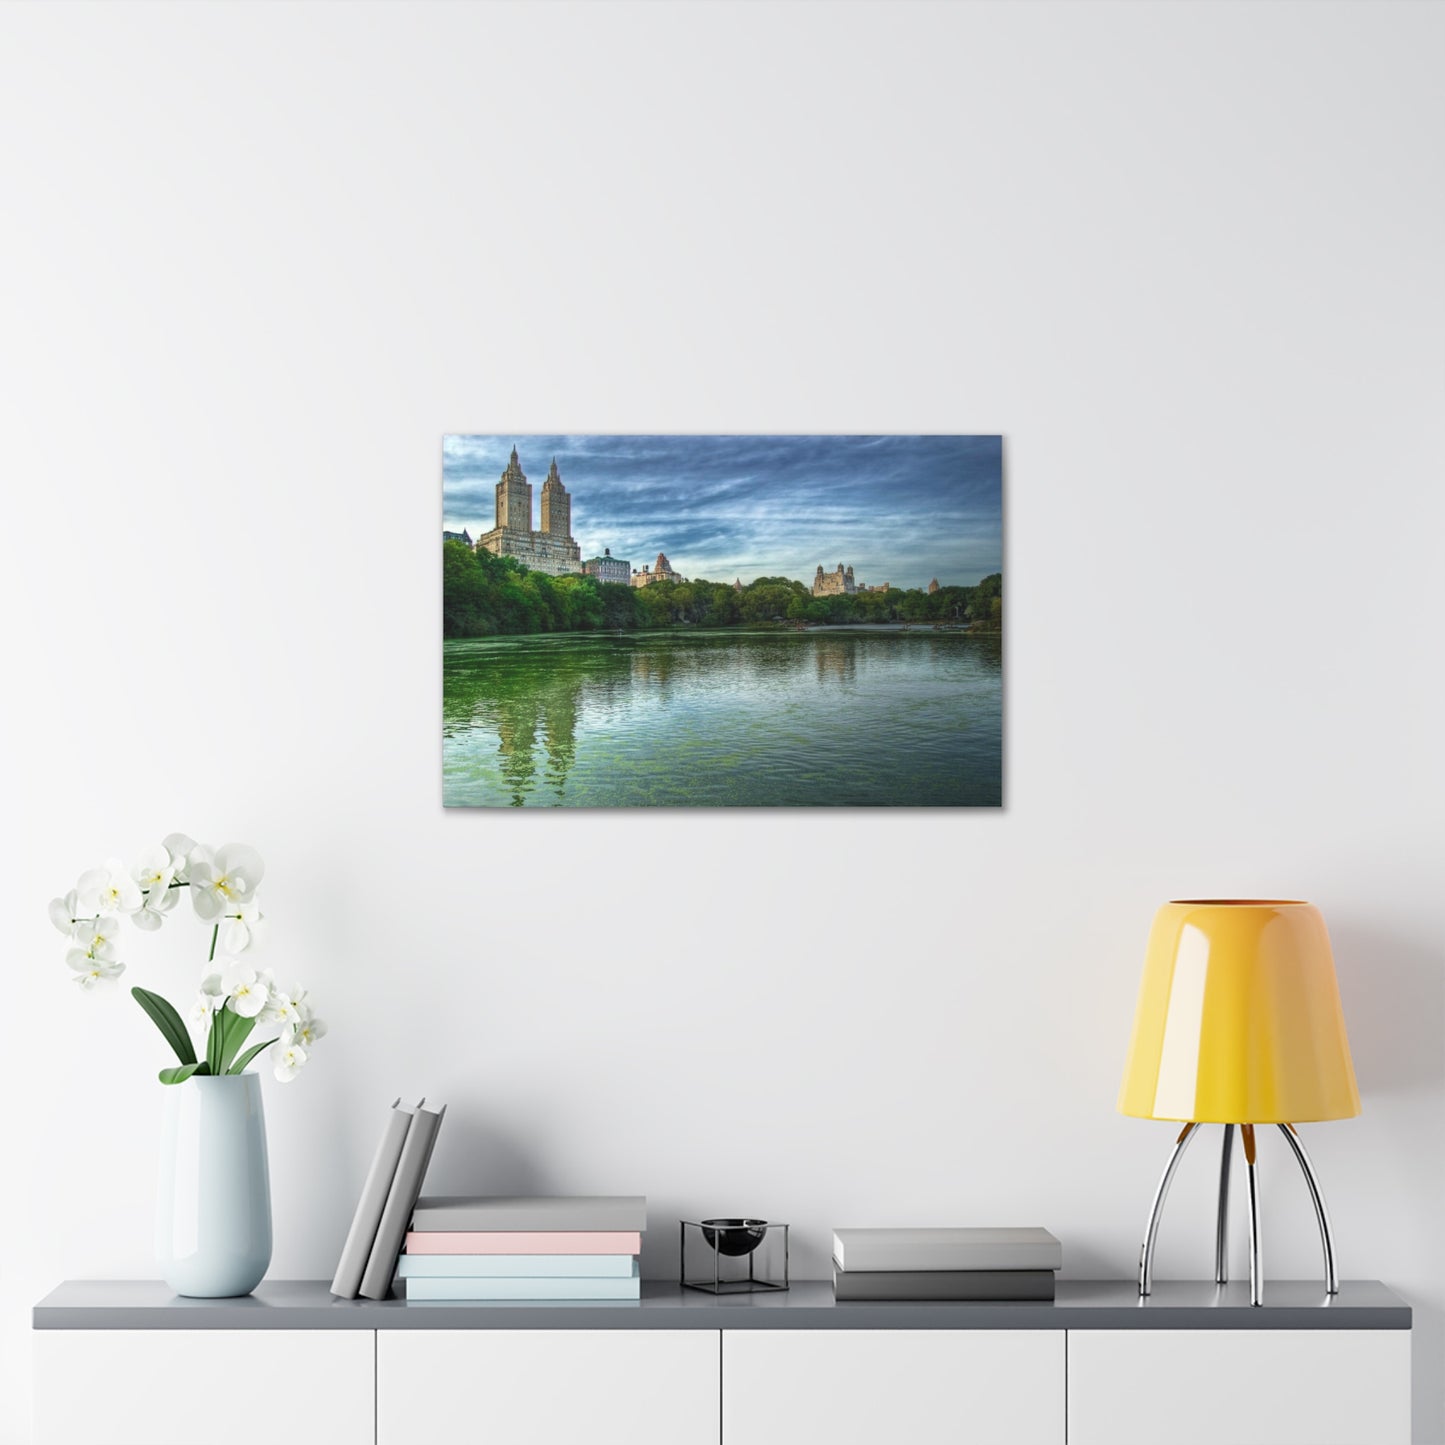 Canvas Print Of The Lake At Central Park in New York City For Wall Art